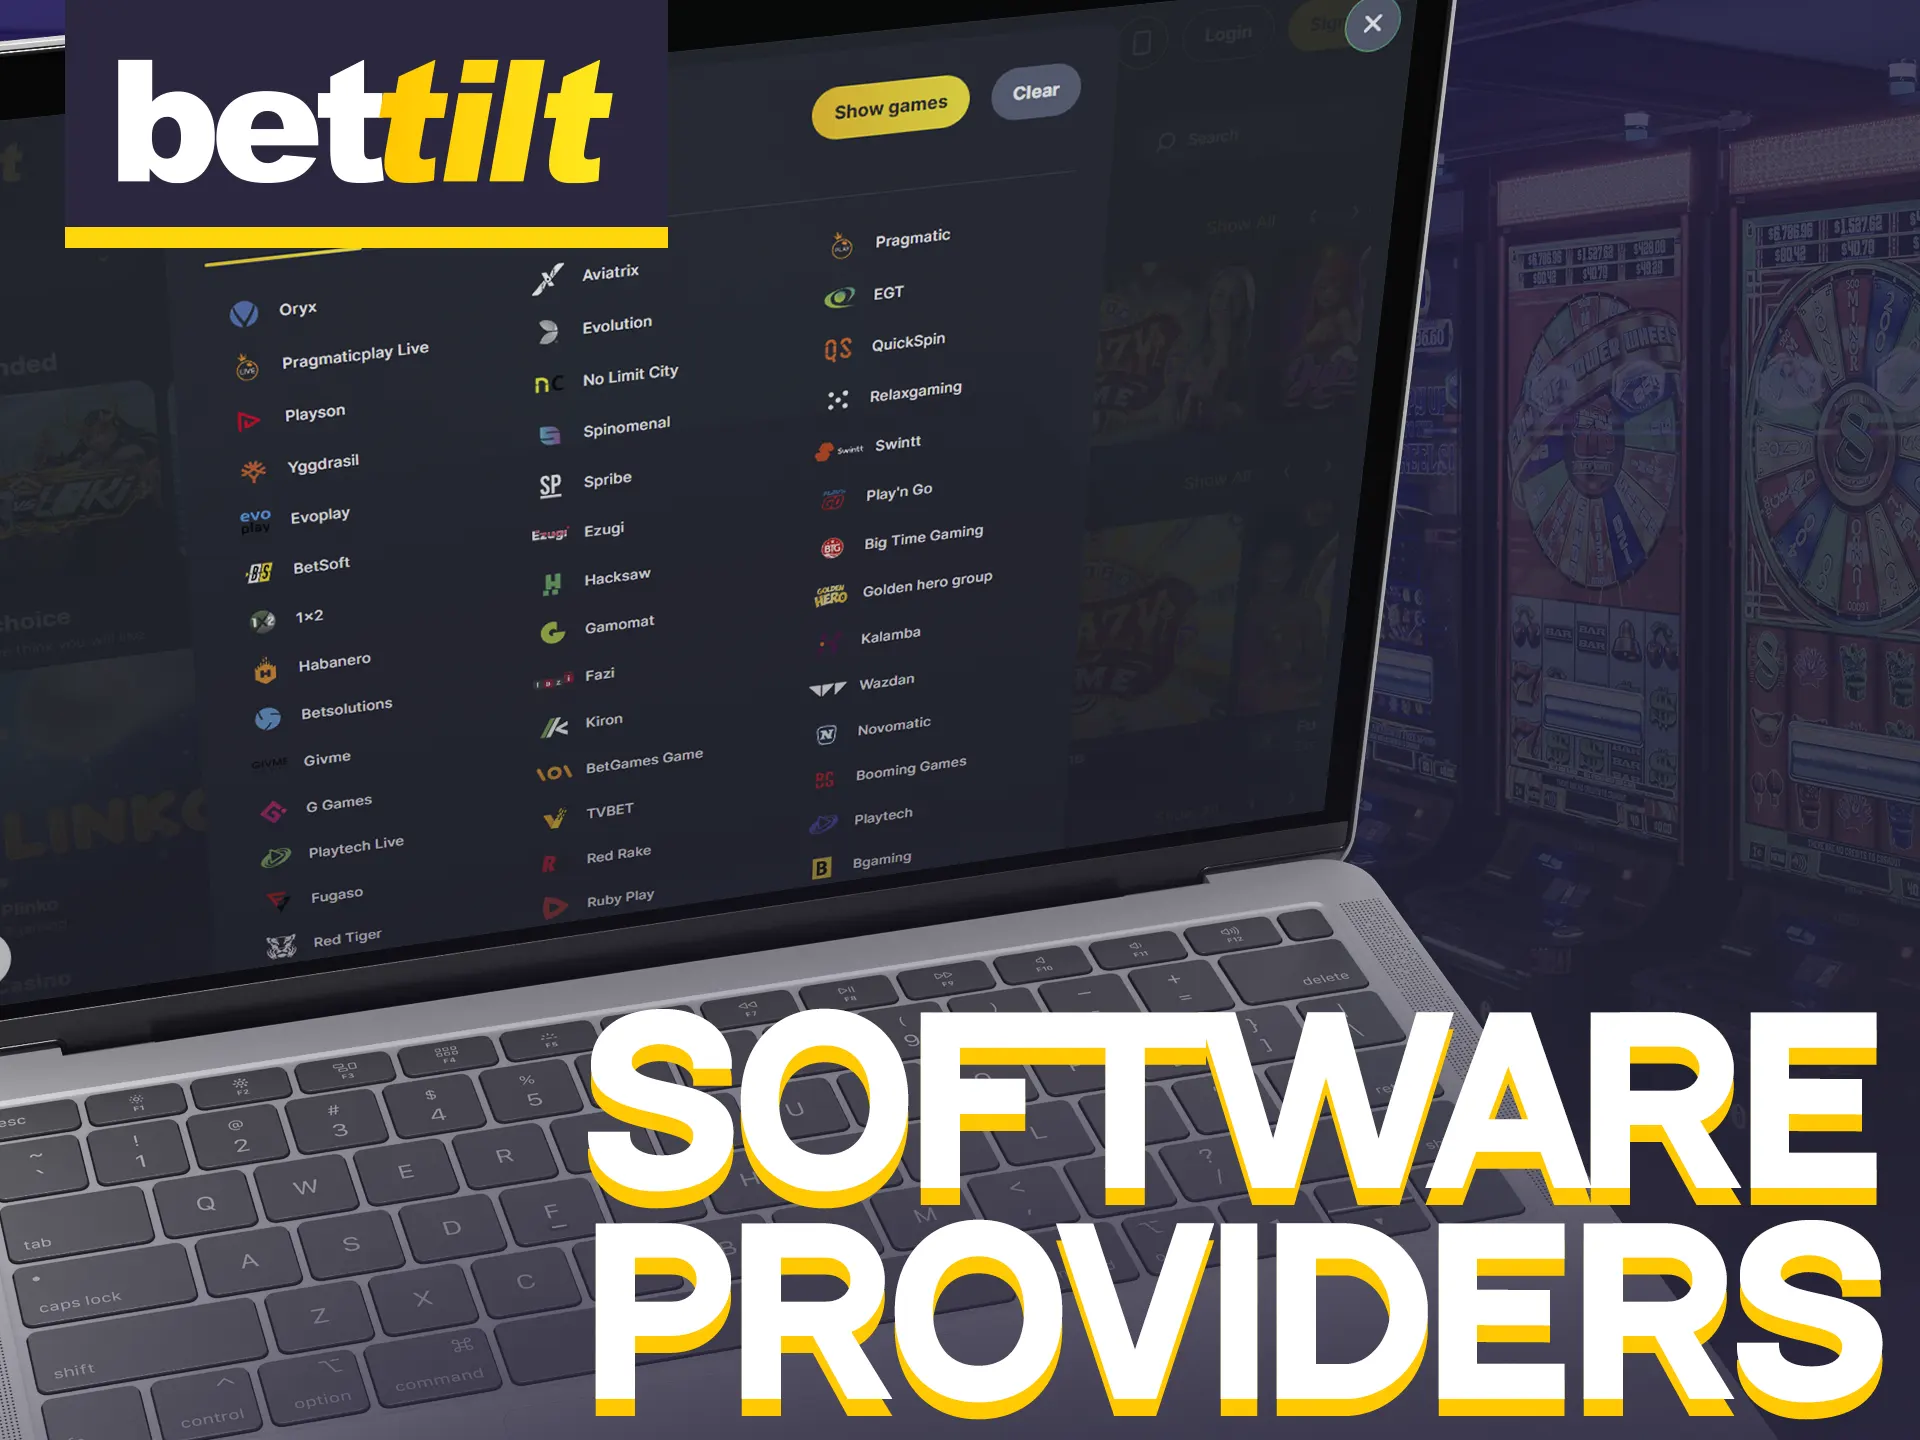 Bettilt offers games from top software providers.